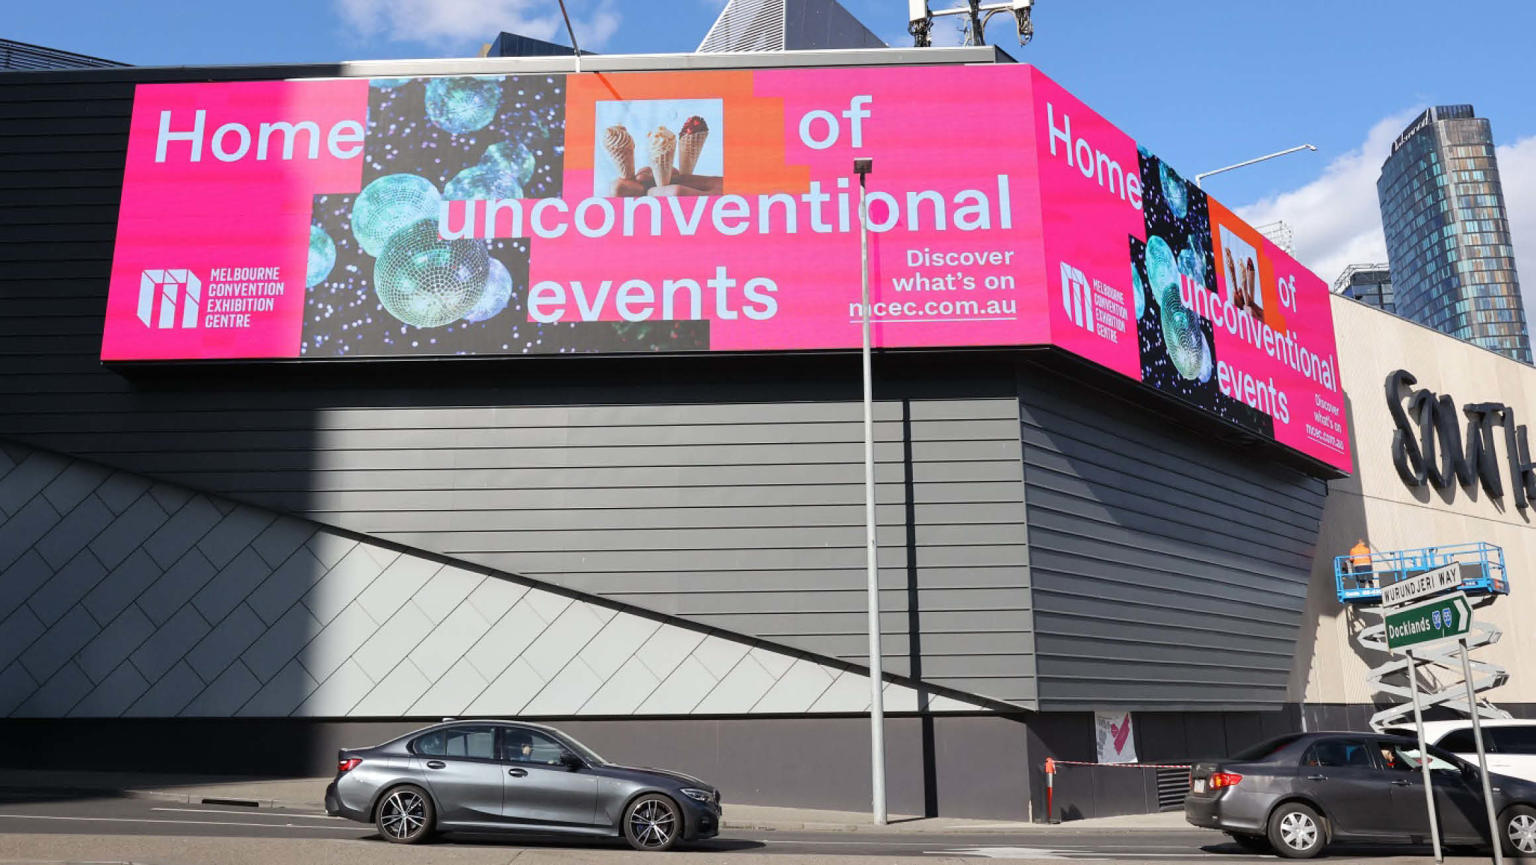 
A sizeable grey building exterior featuring a captivating digital sign in the foreground. The sign displays the vibrant message "Home of unconventional events" alongside imagery of disco balls and ice cream cones. The Melbourne Convention and Exhibition Centre logo is positioned in the bottom left corner of the sign. Cars can be seen driving past the building.